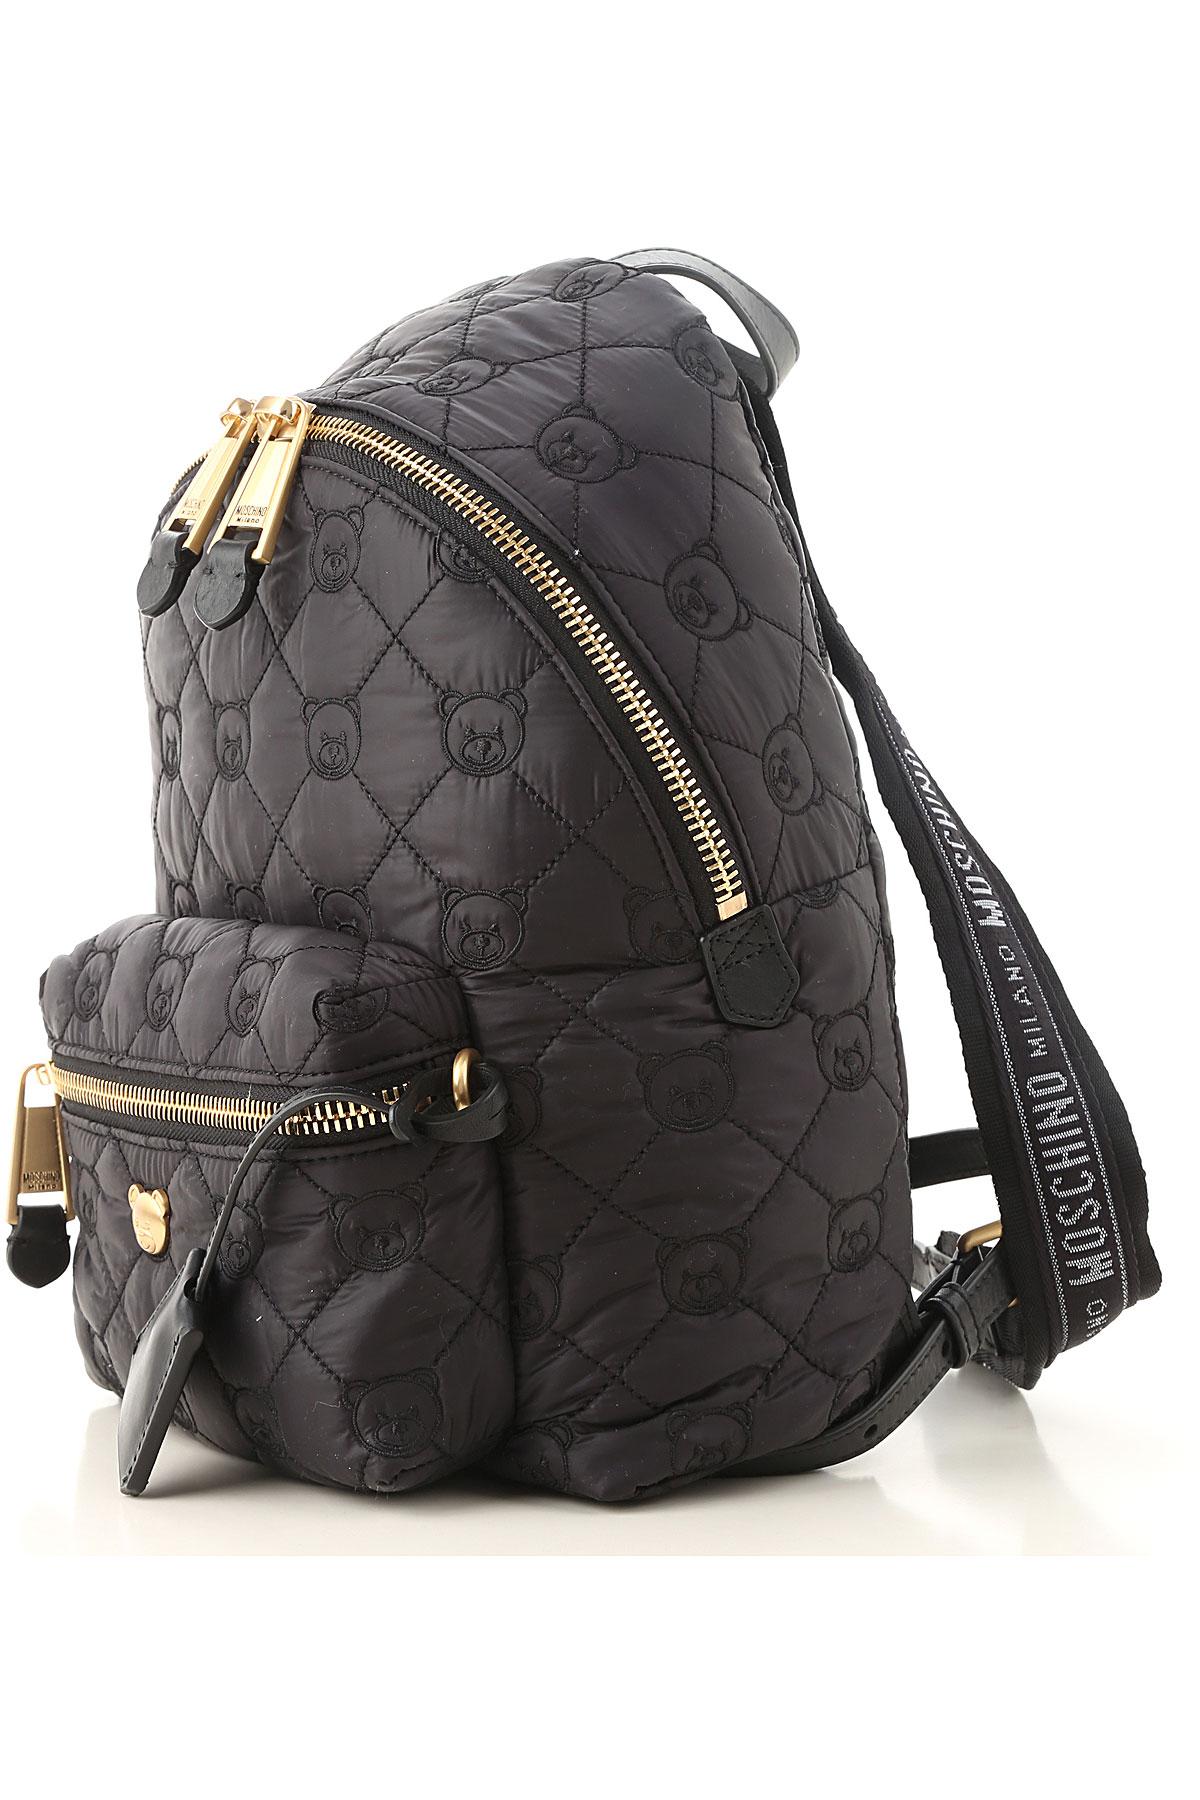 Moschino Synthetic Backpack For Women On Sale in Black - Lyst